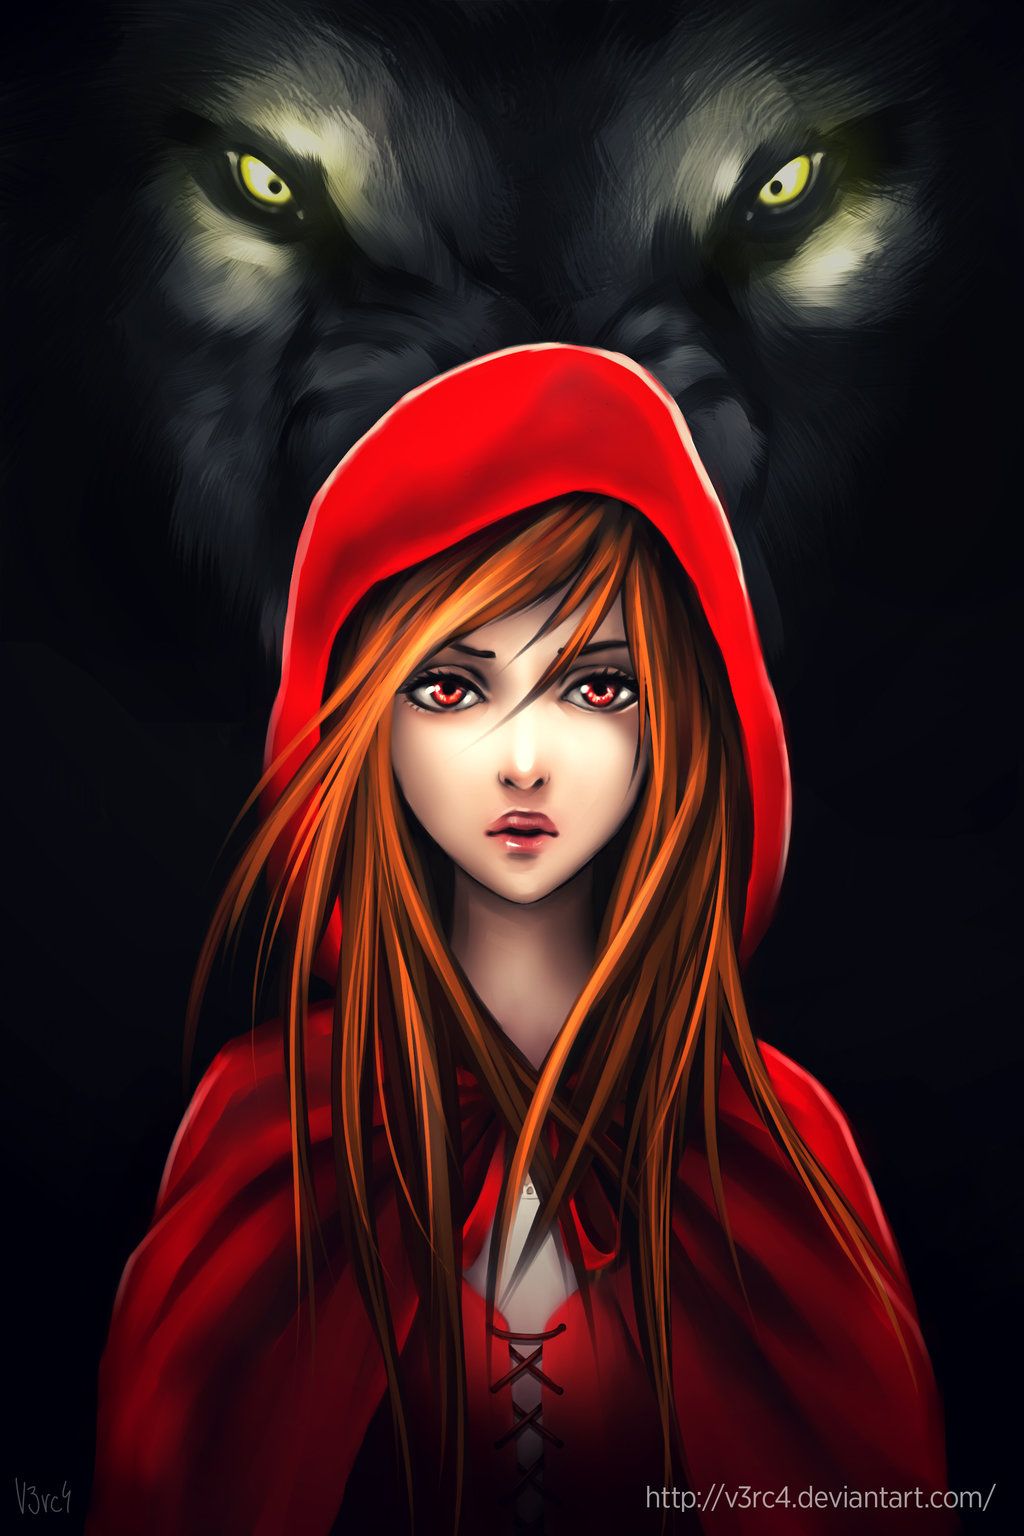 Red Riding Hood wallpaper, Fantasy, HQ Red Riding Hood picture